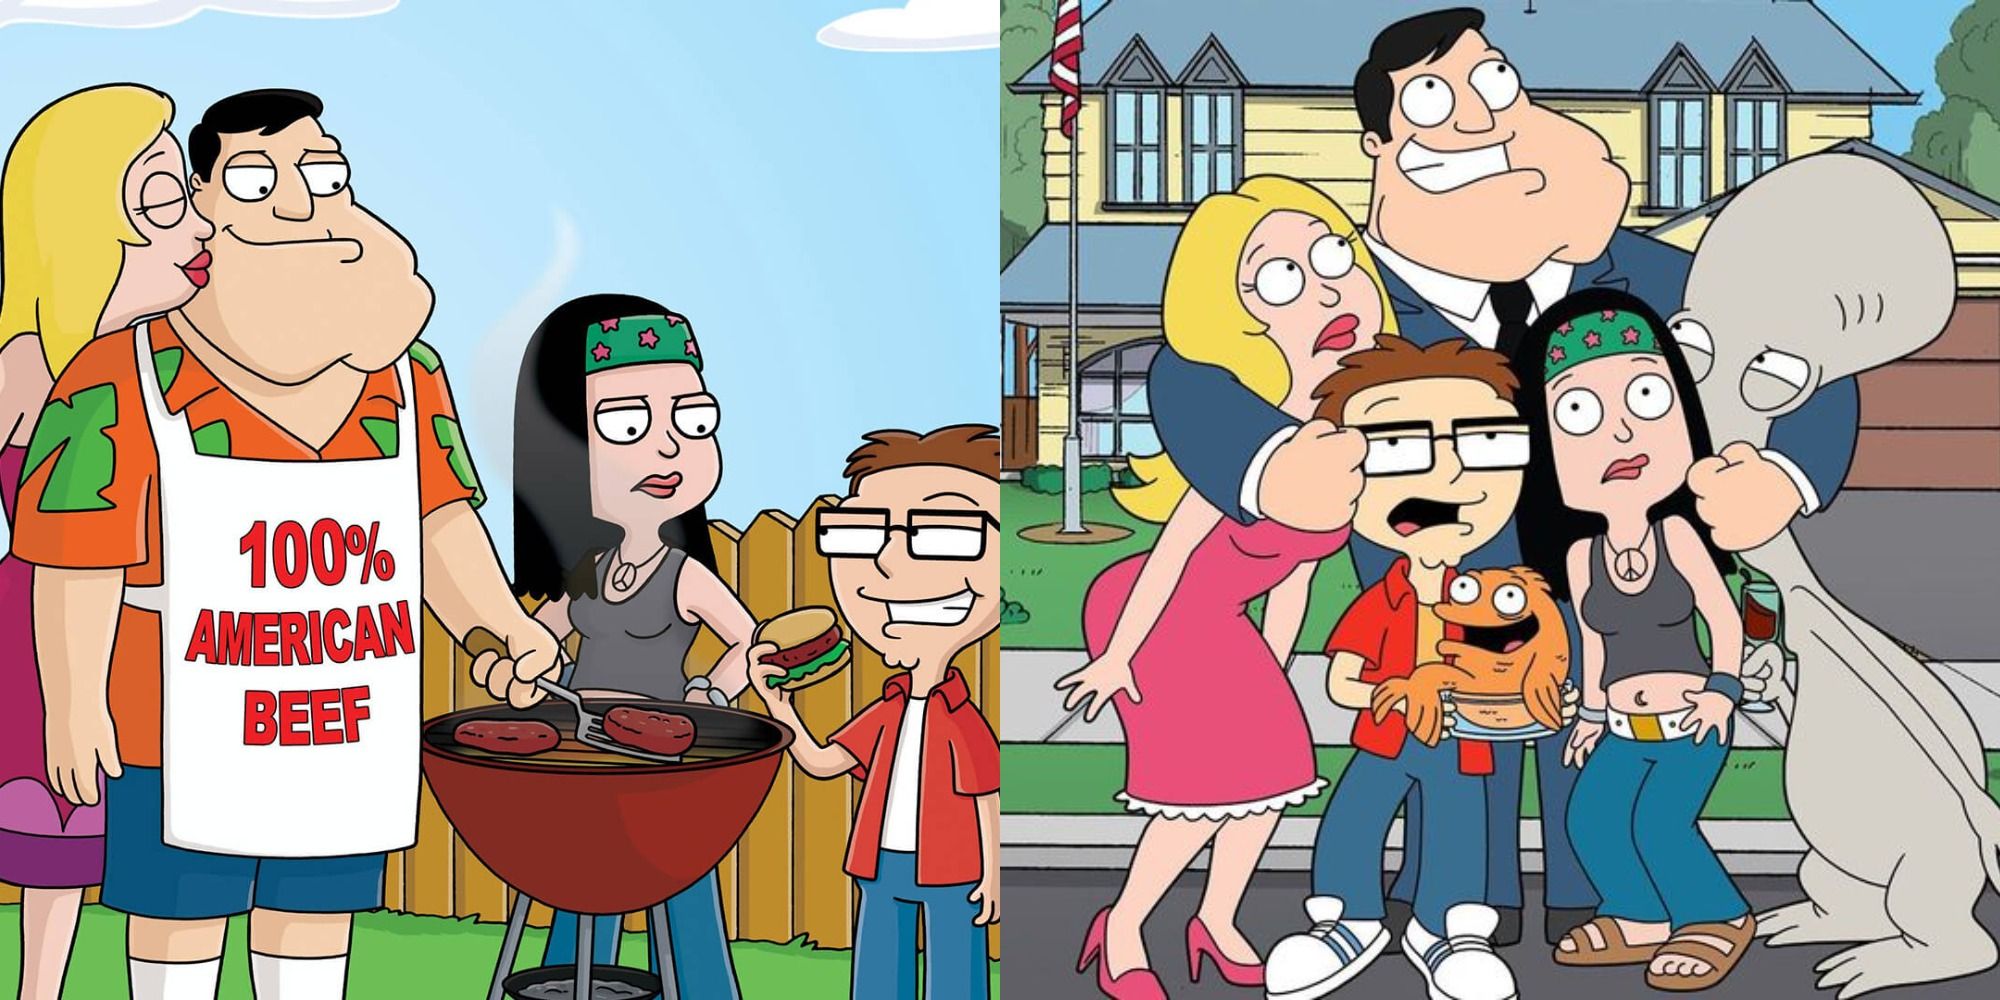 Split image showing characters from American Dad in Season 11 and Season 1